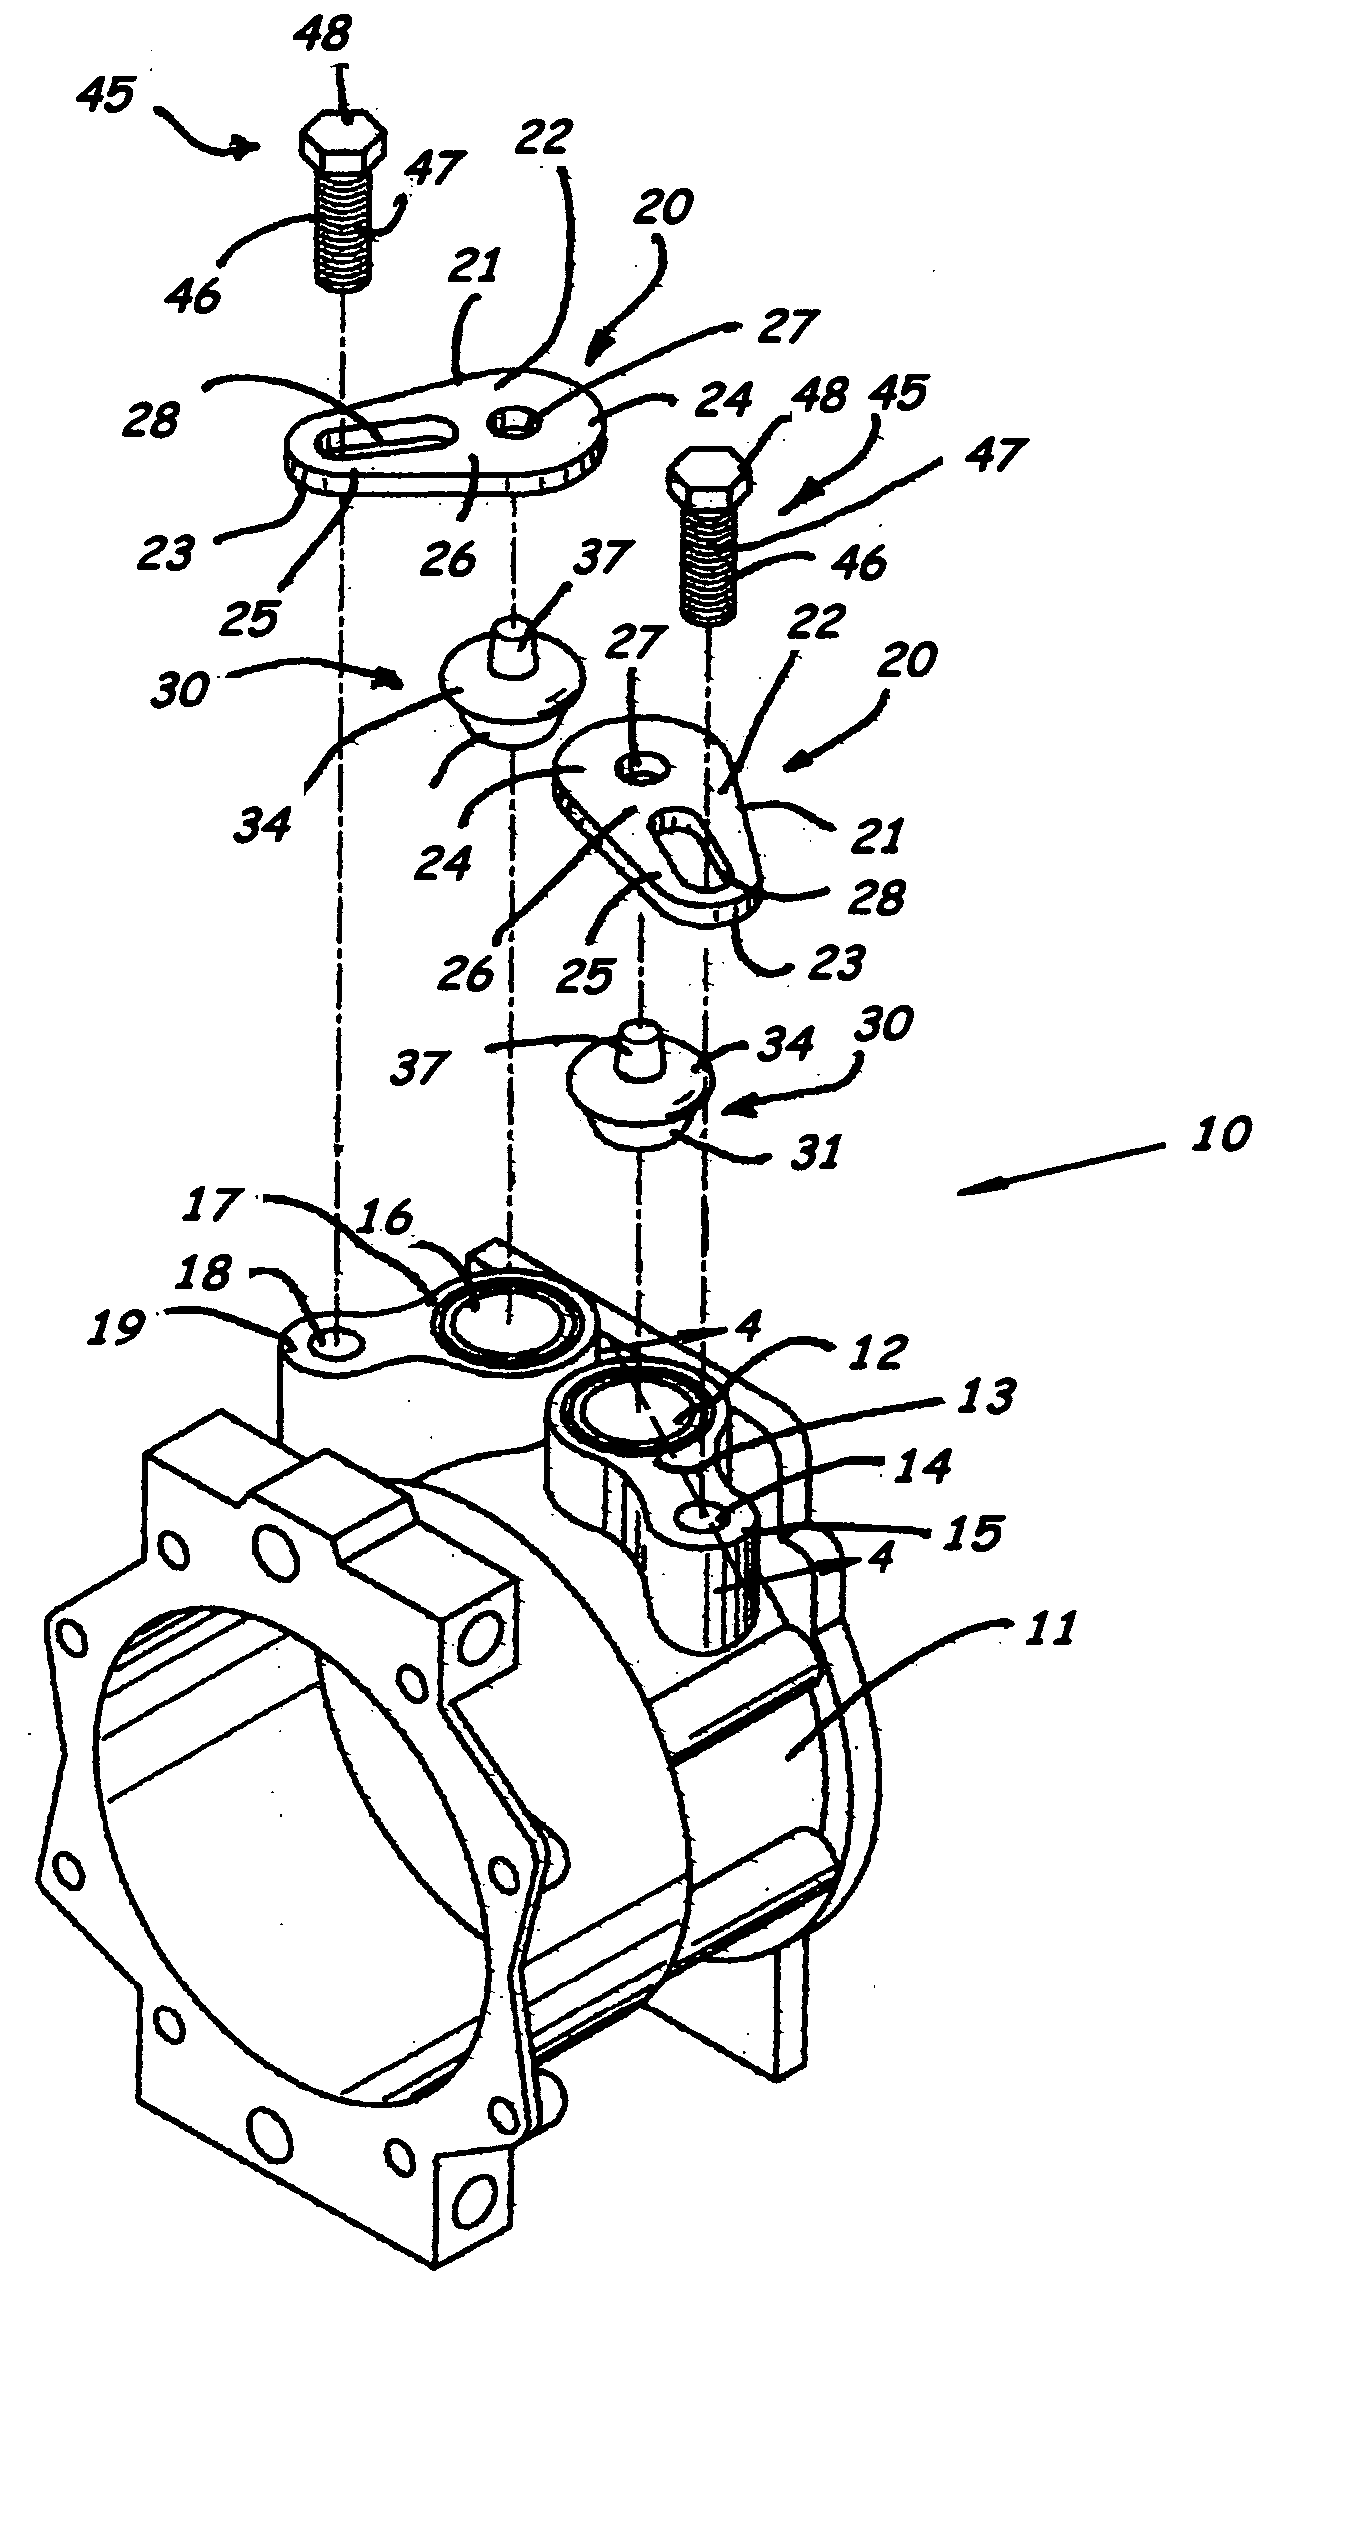 Transporting plate and seal combination, transporting plate, transporting pad seal and compressor plate, and seal kit for vehicle air conditioning compressor and related methods